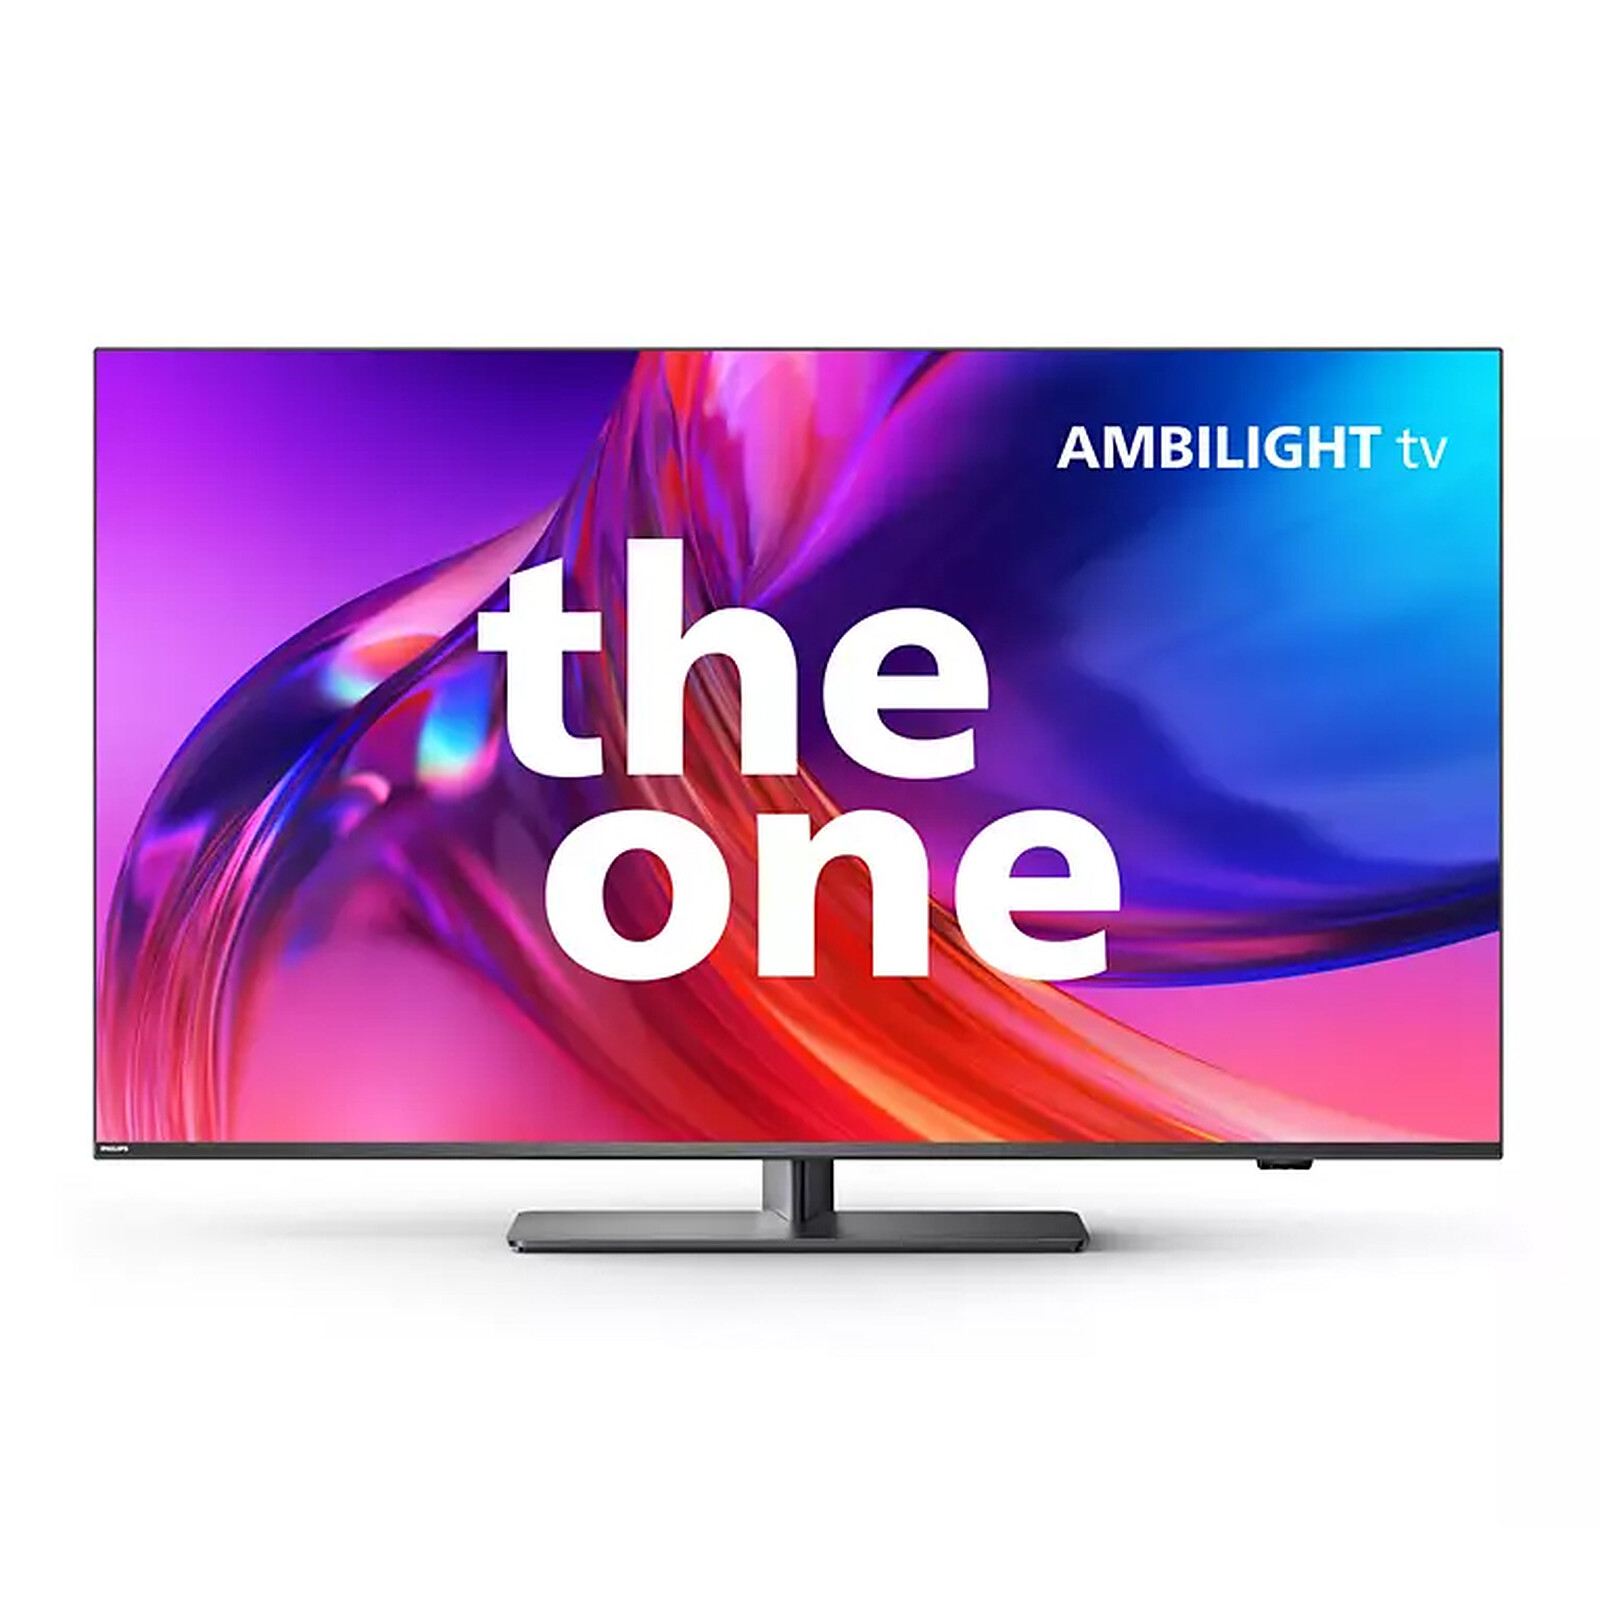 PHILIPS Ambilight 55PUS7304/12 TV 55 Inch LED Smart TV (4K UHD, P5 perfect  Picture Engine